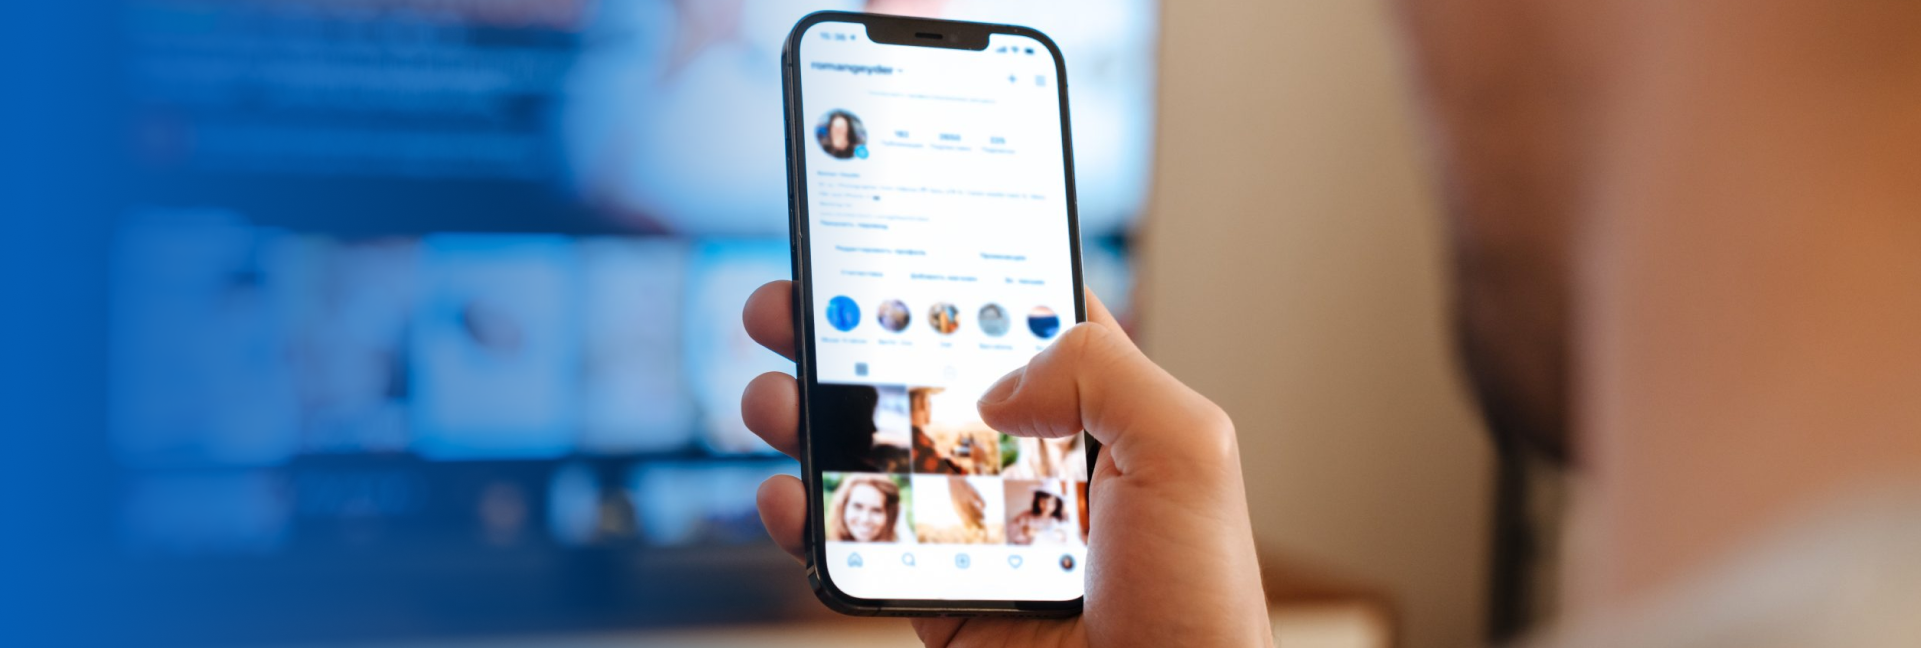 4 Ways To Connect Your iPhone To Your TV - Comwave